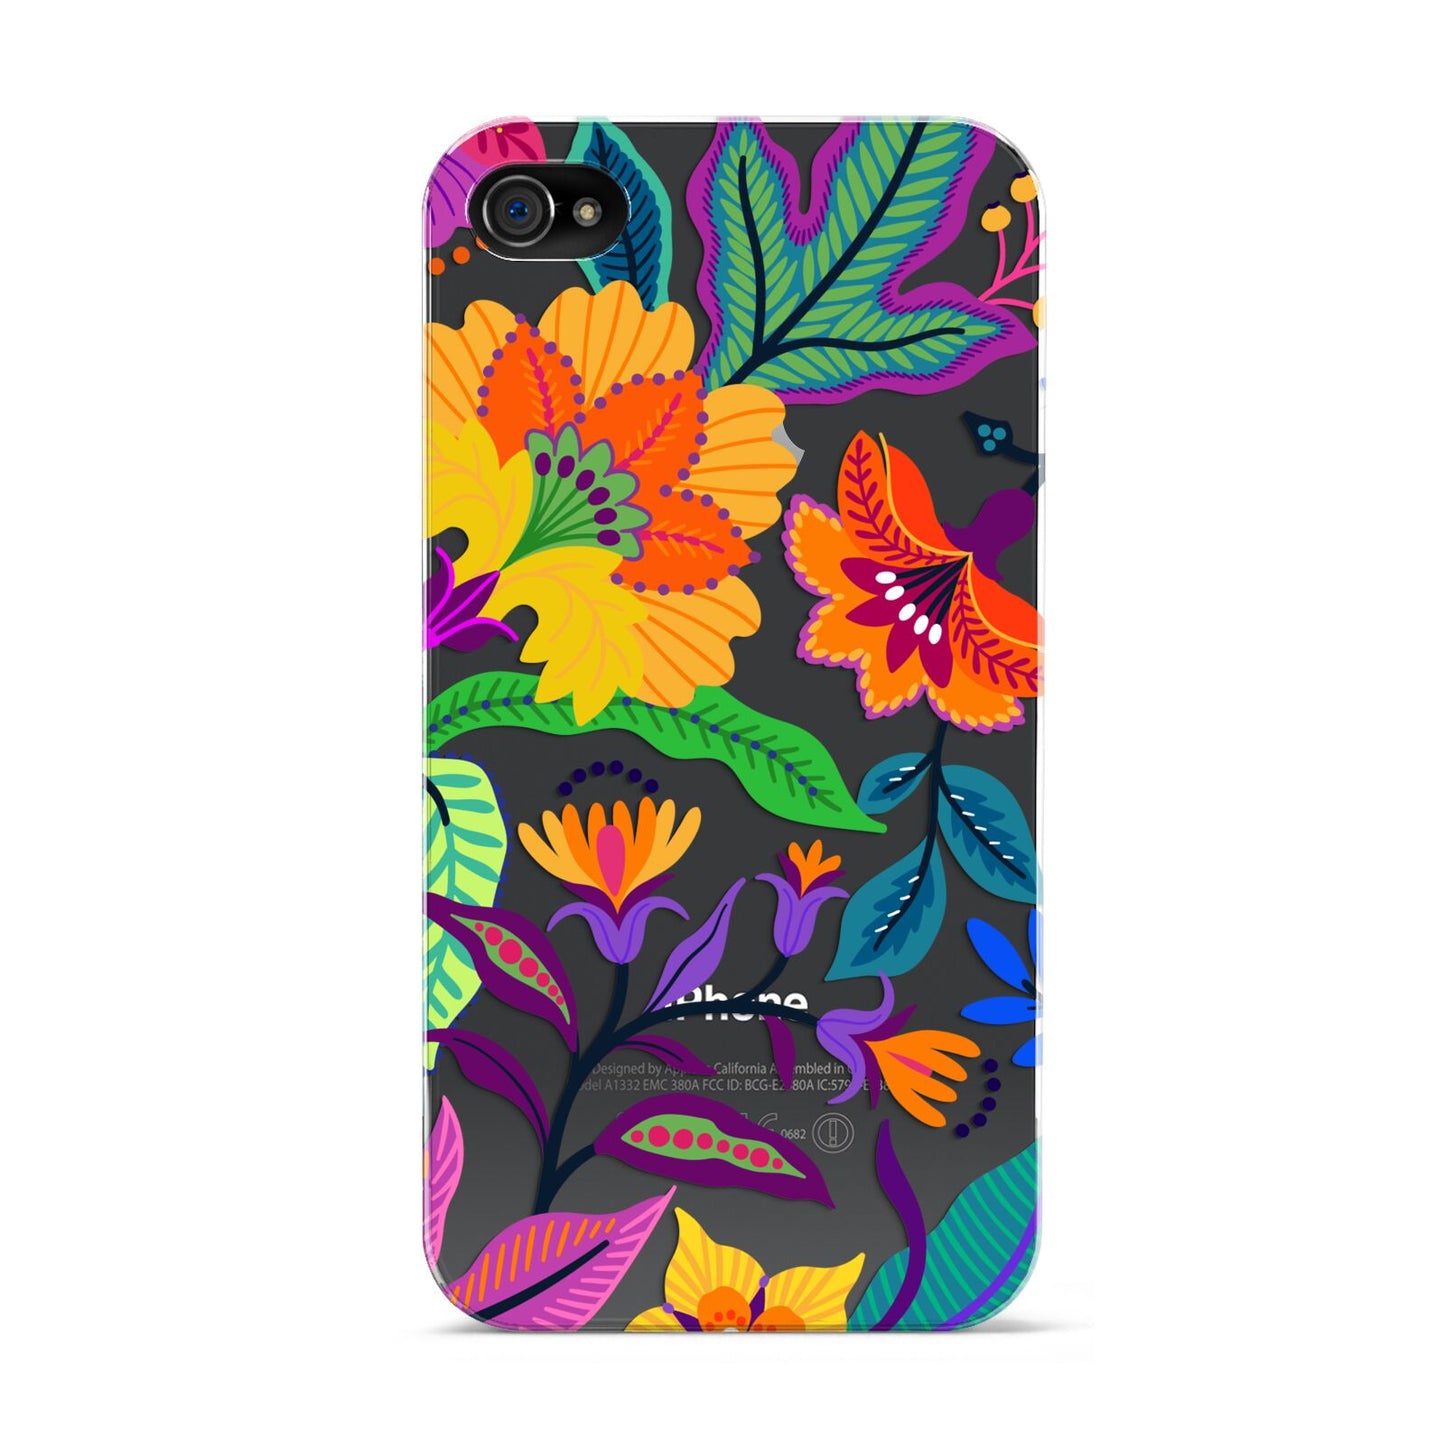 Tropical Floral Apple iPhone 4s Case